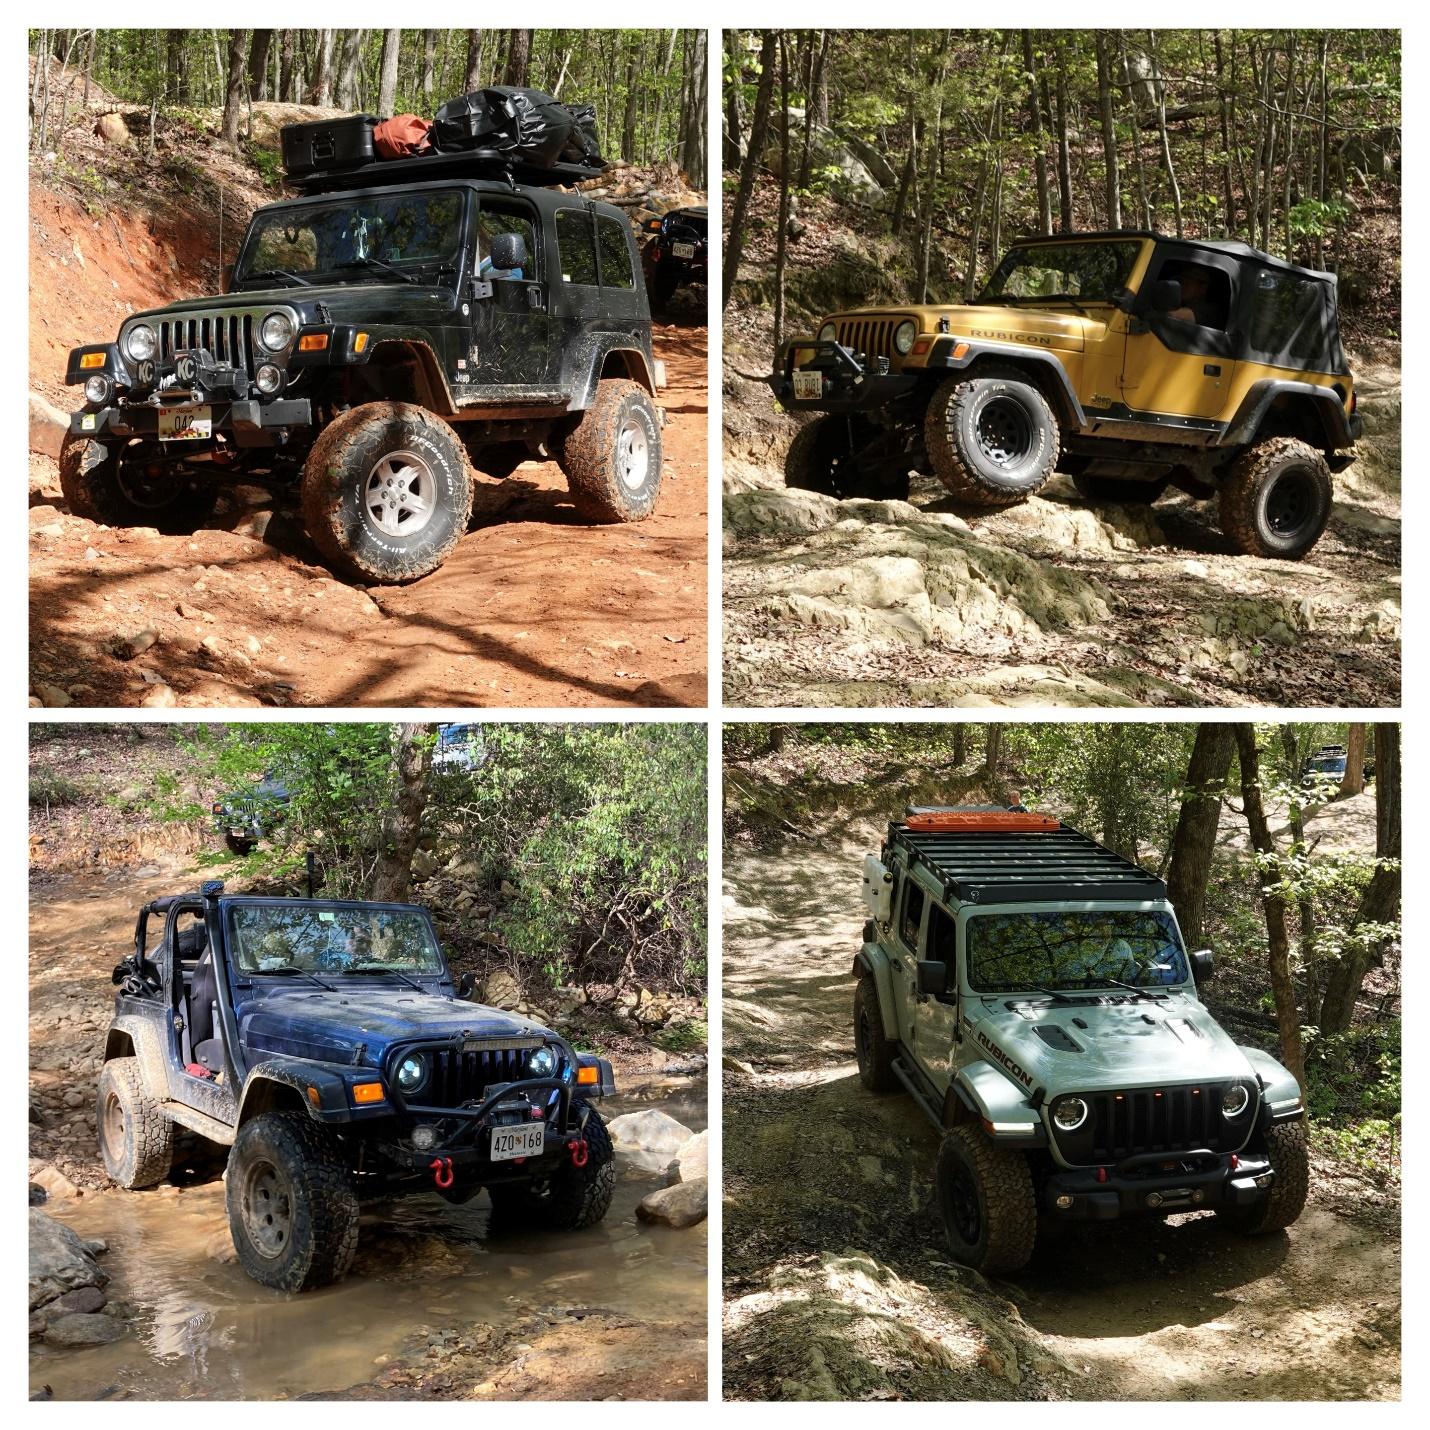 A collage of four different jeeps

Description automatically generated